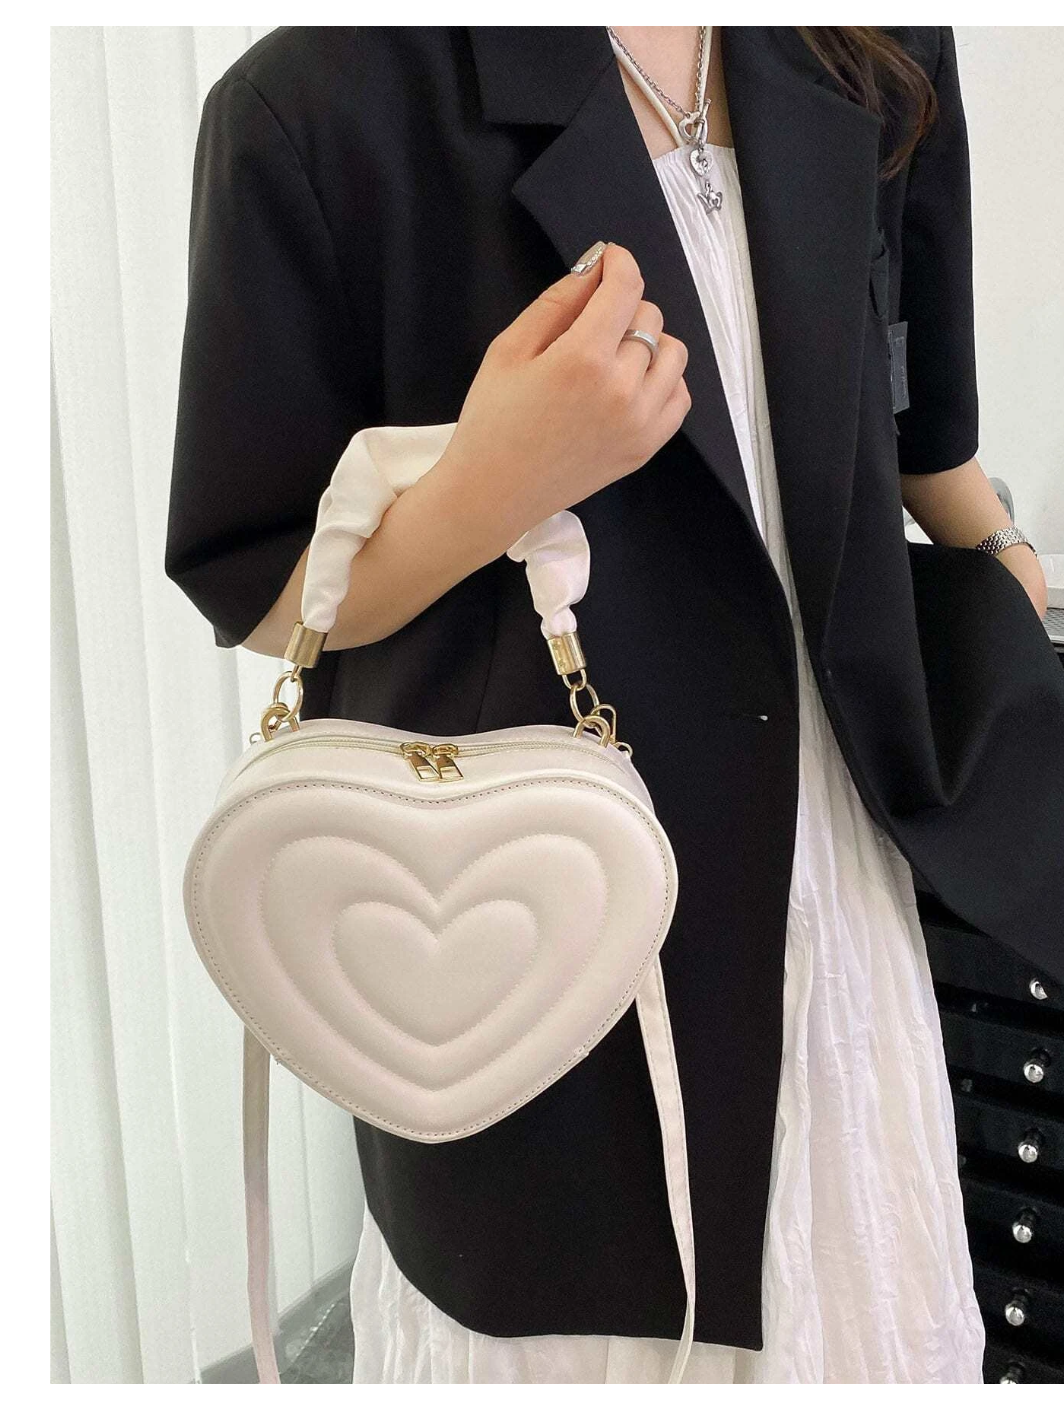 Heartfelt Chic: Trendy Heart Design Novelty Bag - The Perfect Match for Every Occasion!